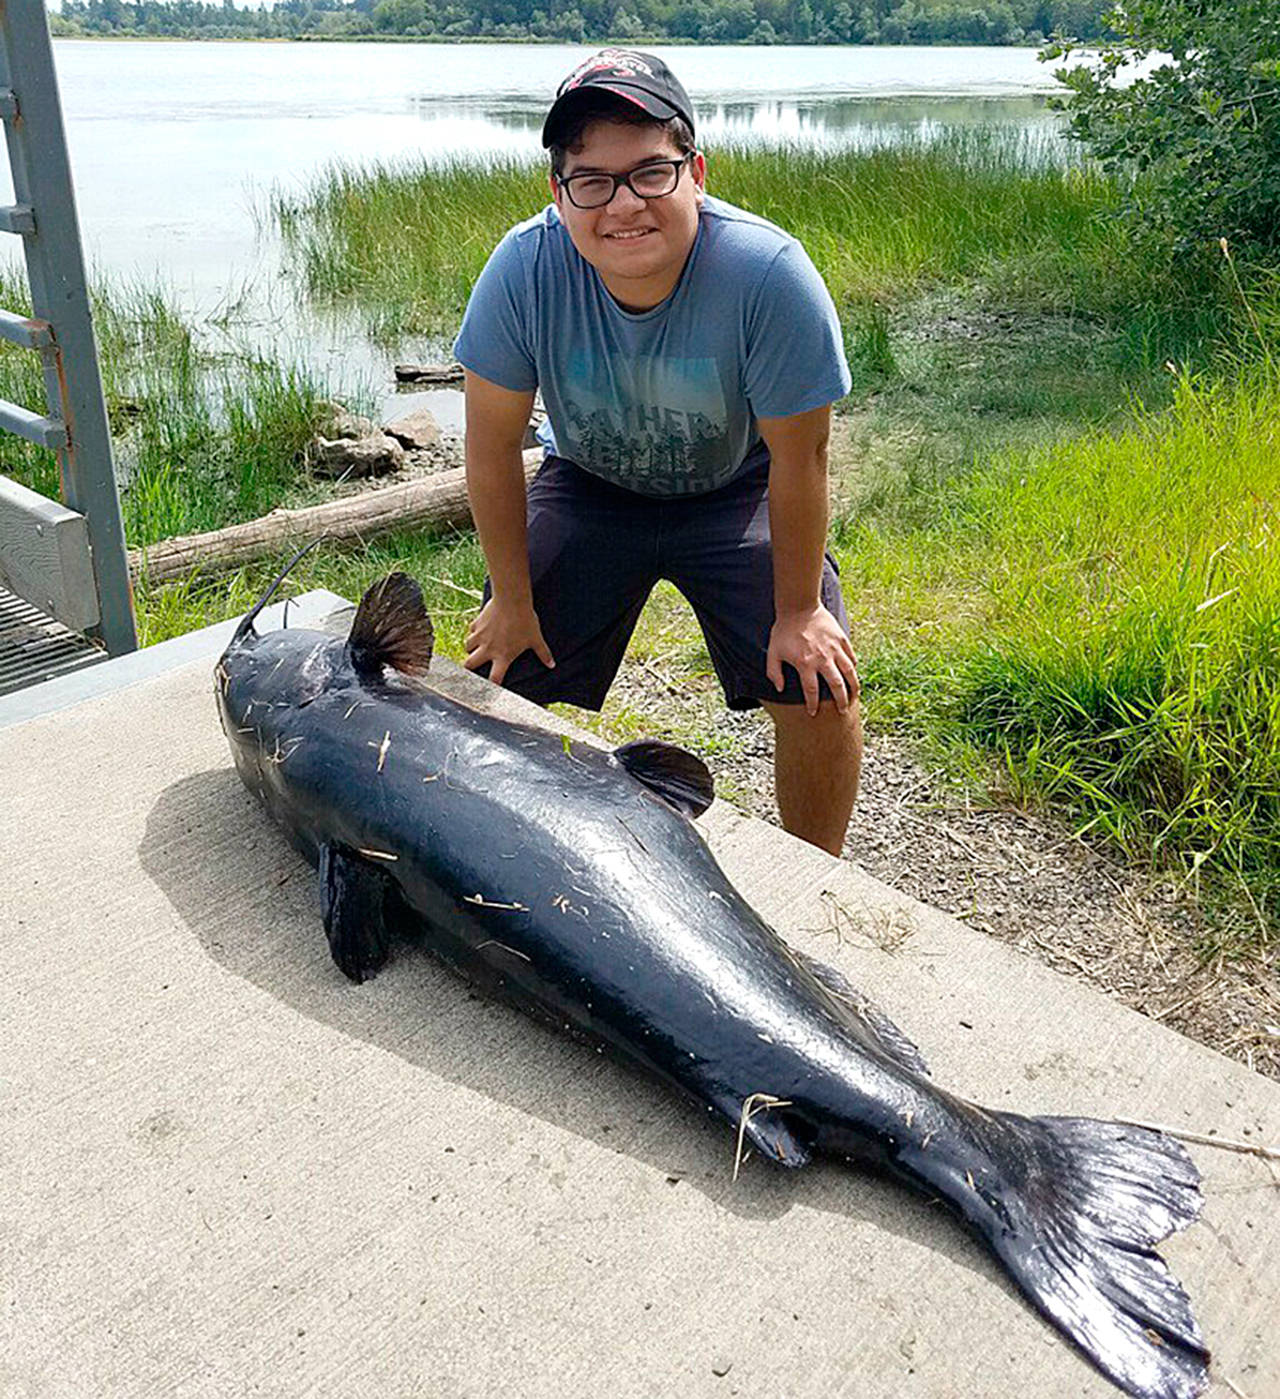 State Department of Fish and Wildlife Blaine’s Cole Abshere set a new state record for channel catfish when he reeled in this 37.7-pounder on Lake Terrell in Whatcom County.